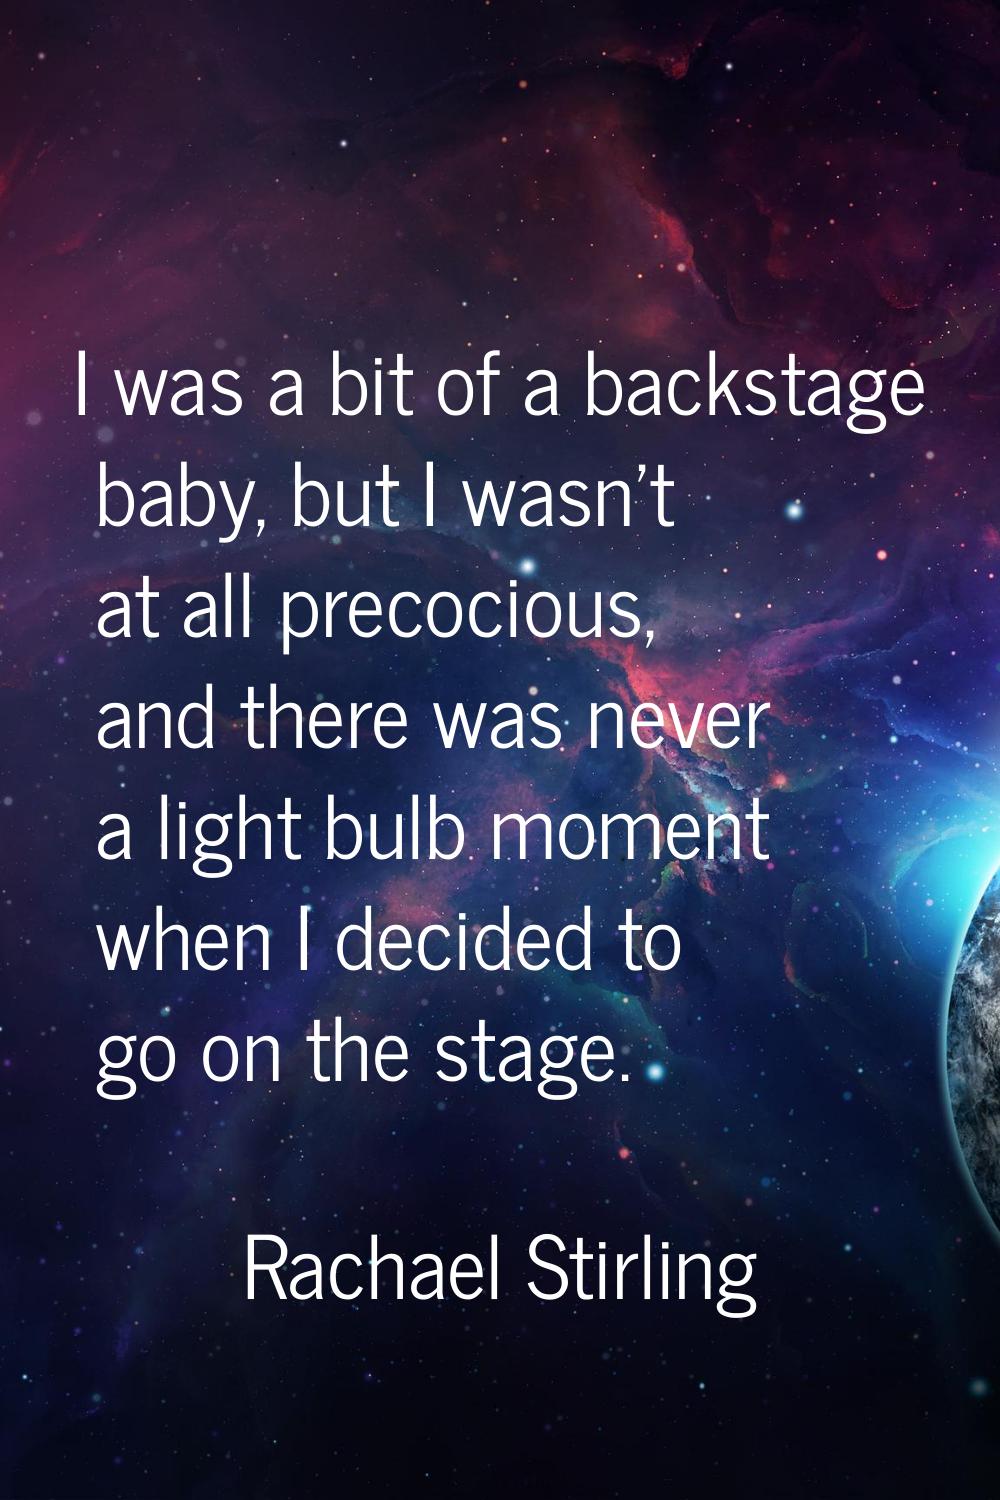 I was a bit of a backstage baby, but I wasn't at all precocious, and there was never a light bulb m